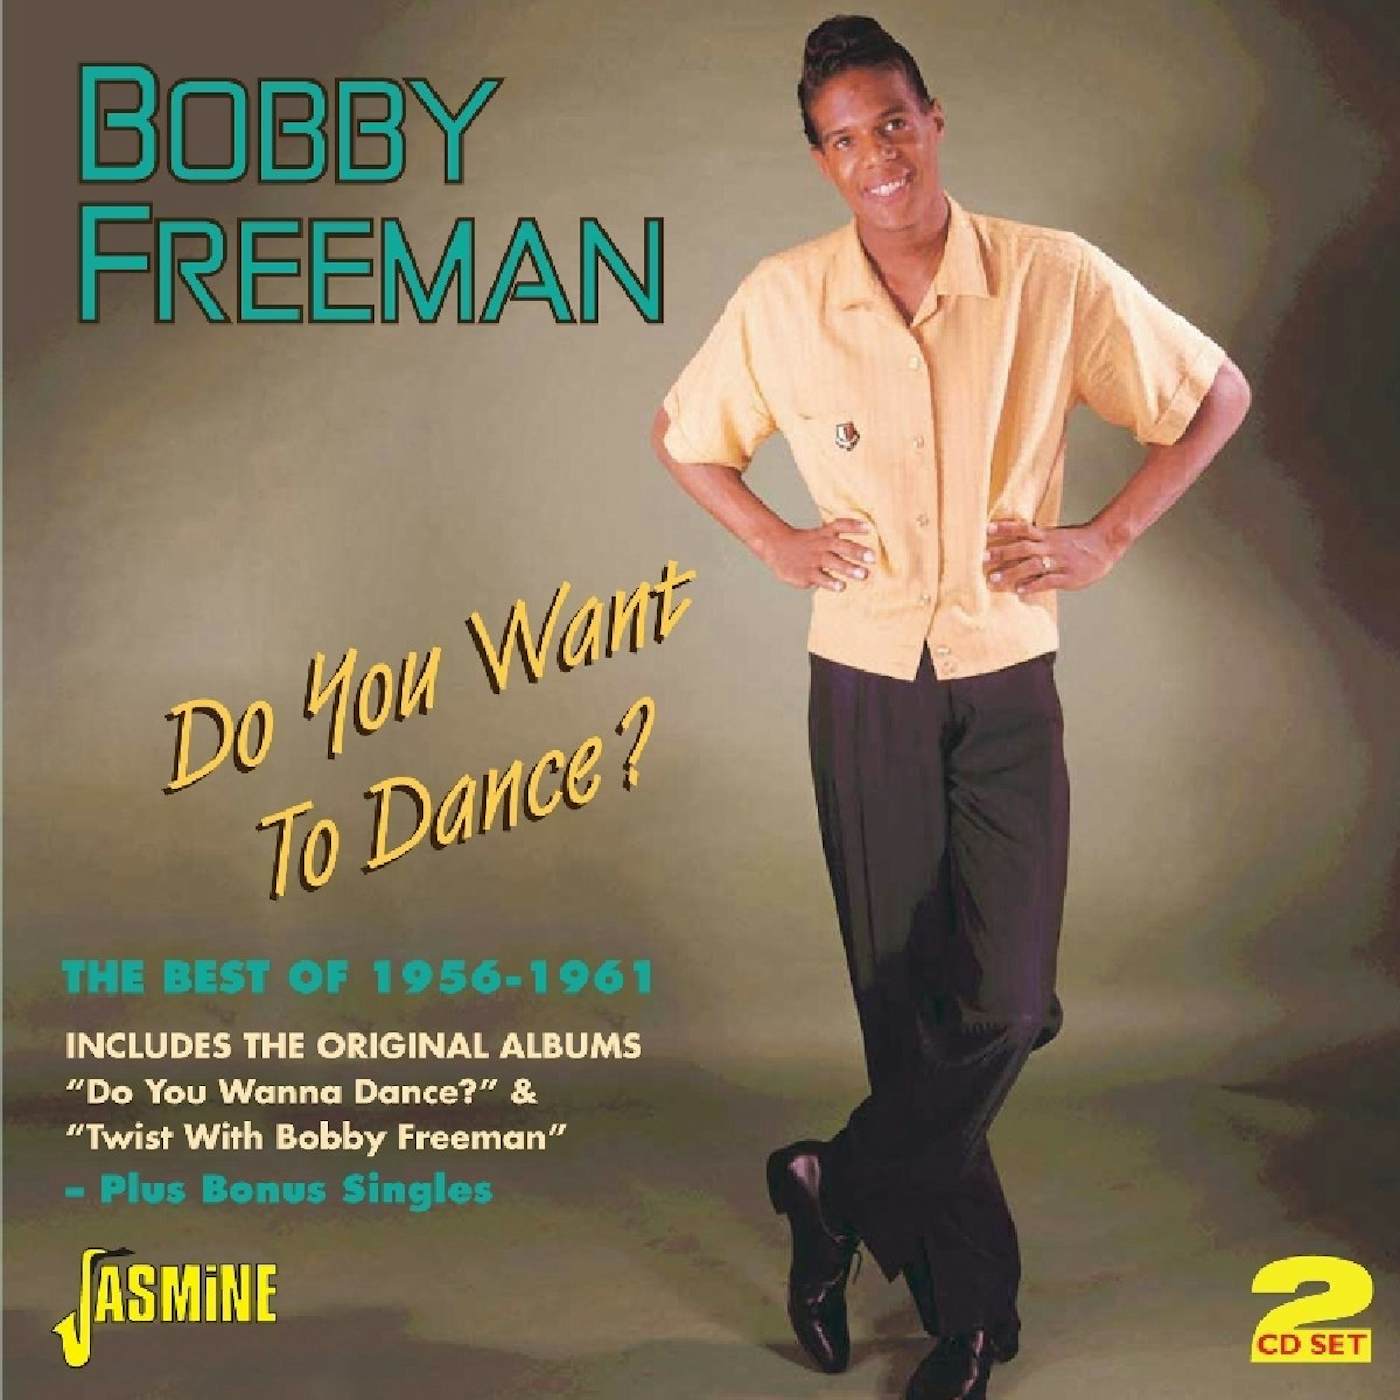 Bobby Freeman DO YOU WANT TO DANCE: BEST OF 1956-61 CD